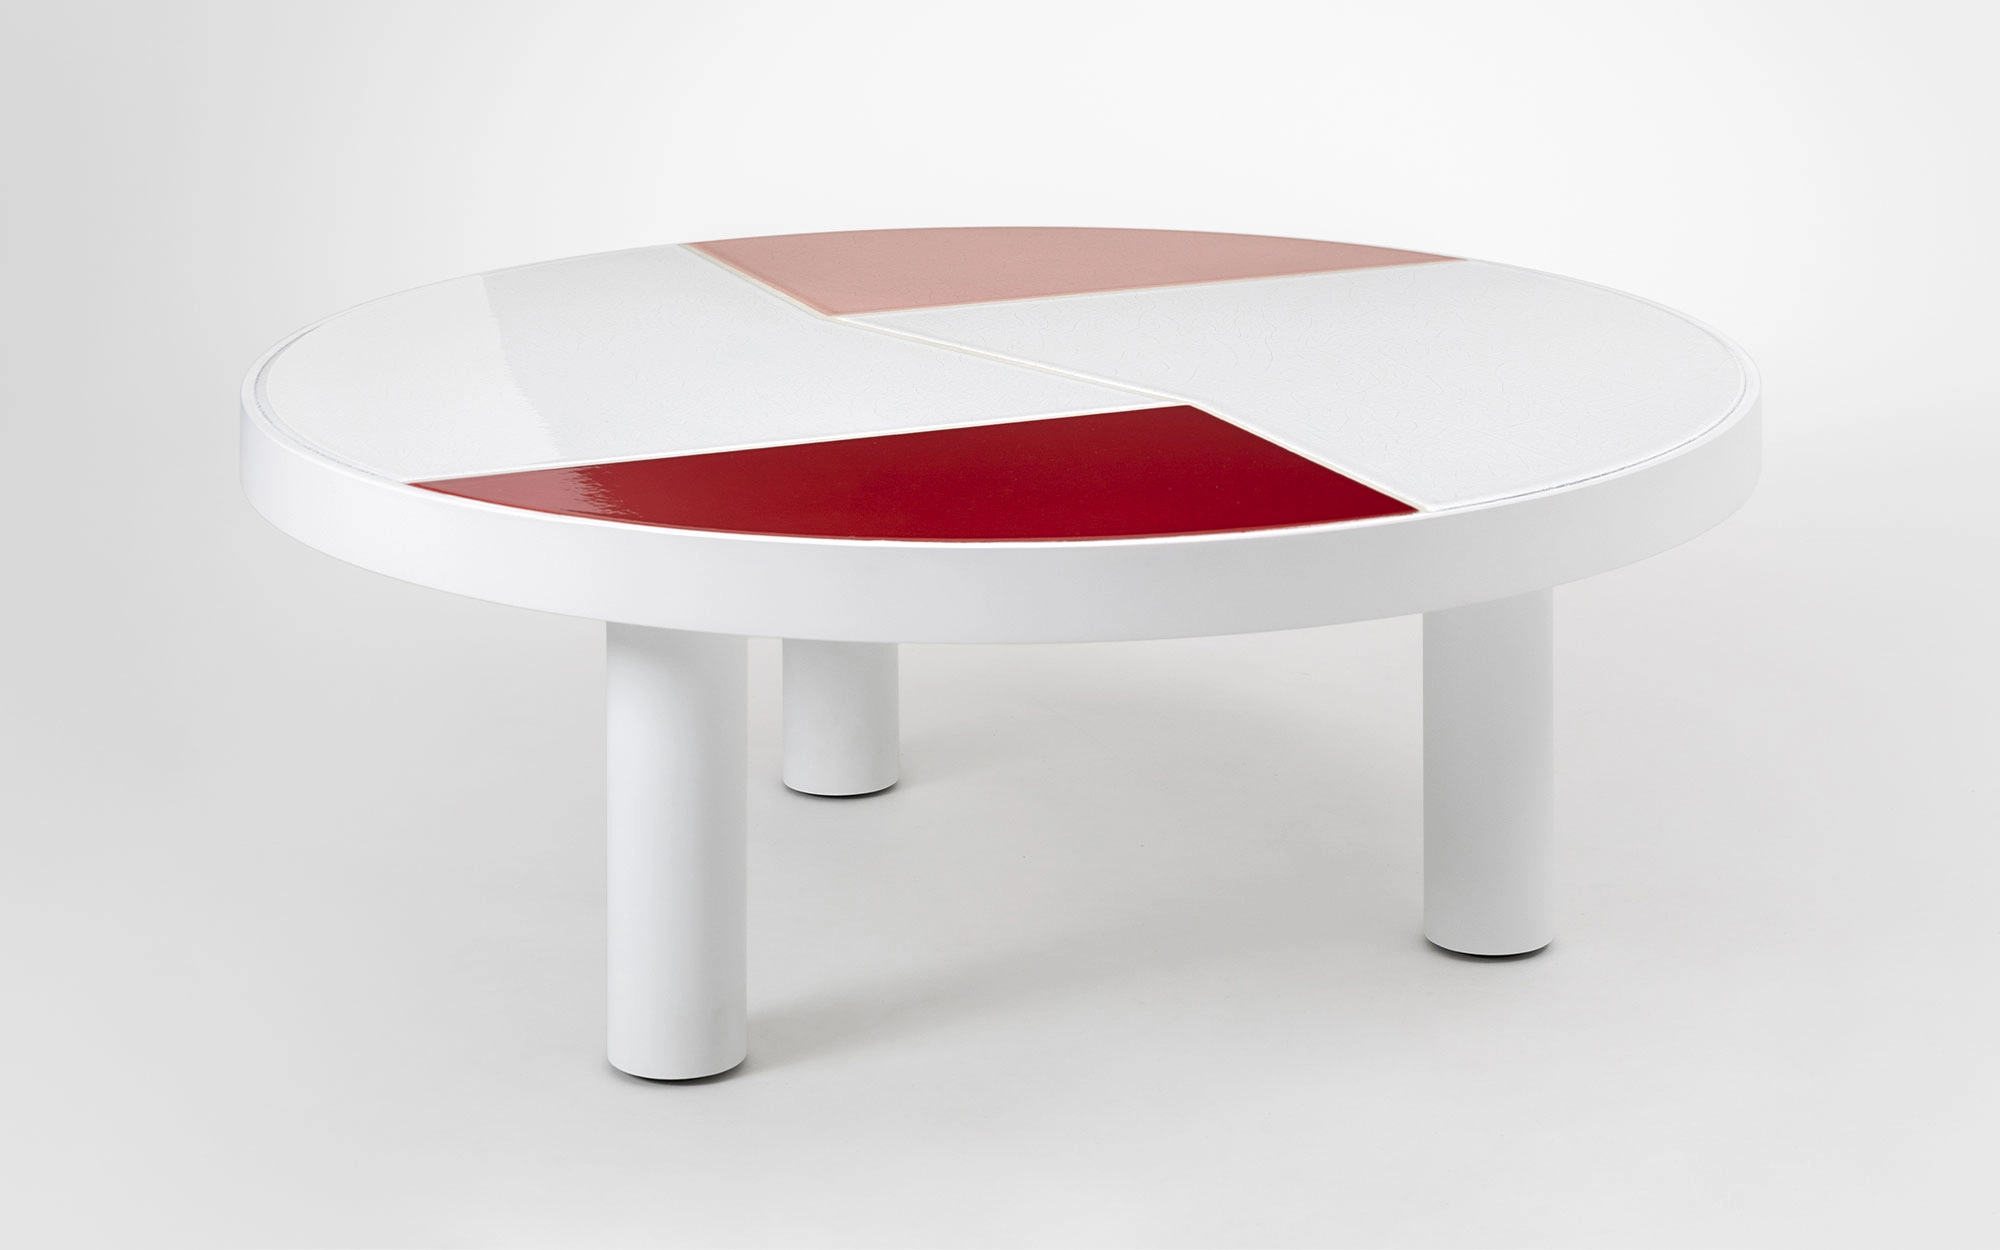 Fraction Coffee Table - Pierre Charpin - Bench - Galerie kreo